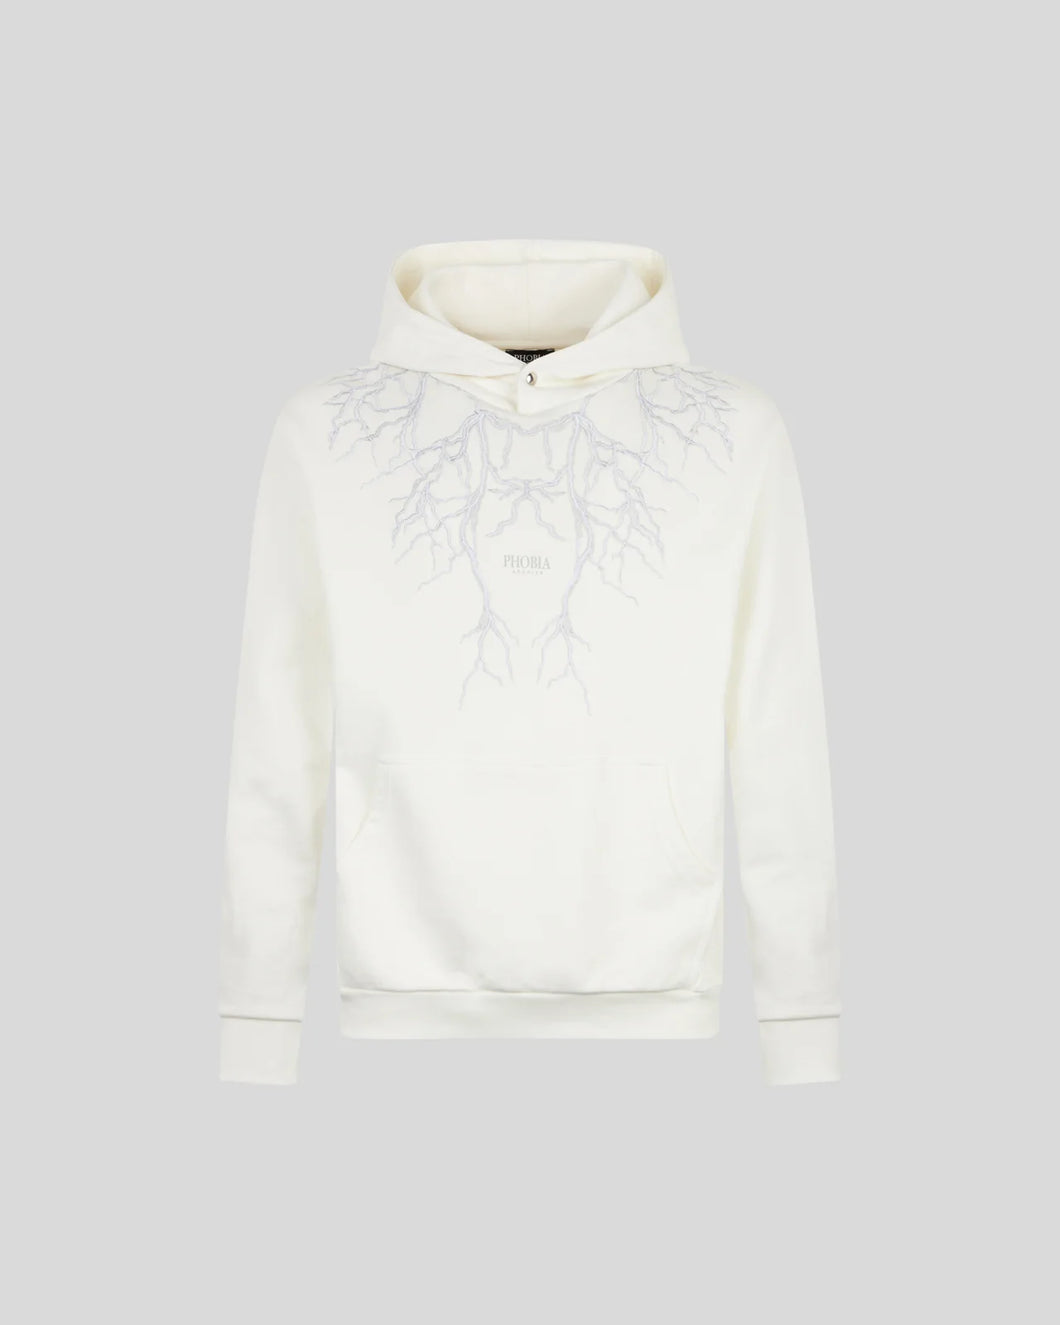 WHITE HOODIE WITH GREY EMBROIDERY LIGHTNING